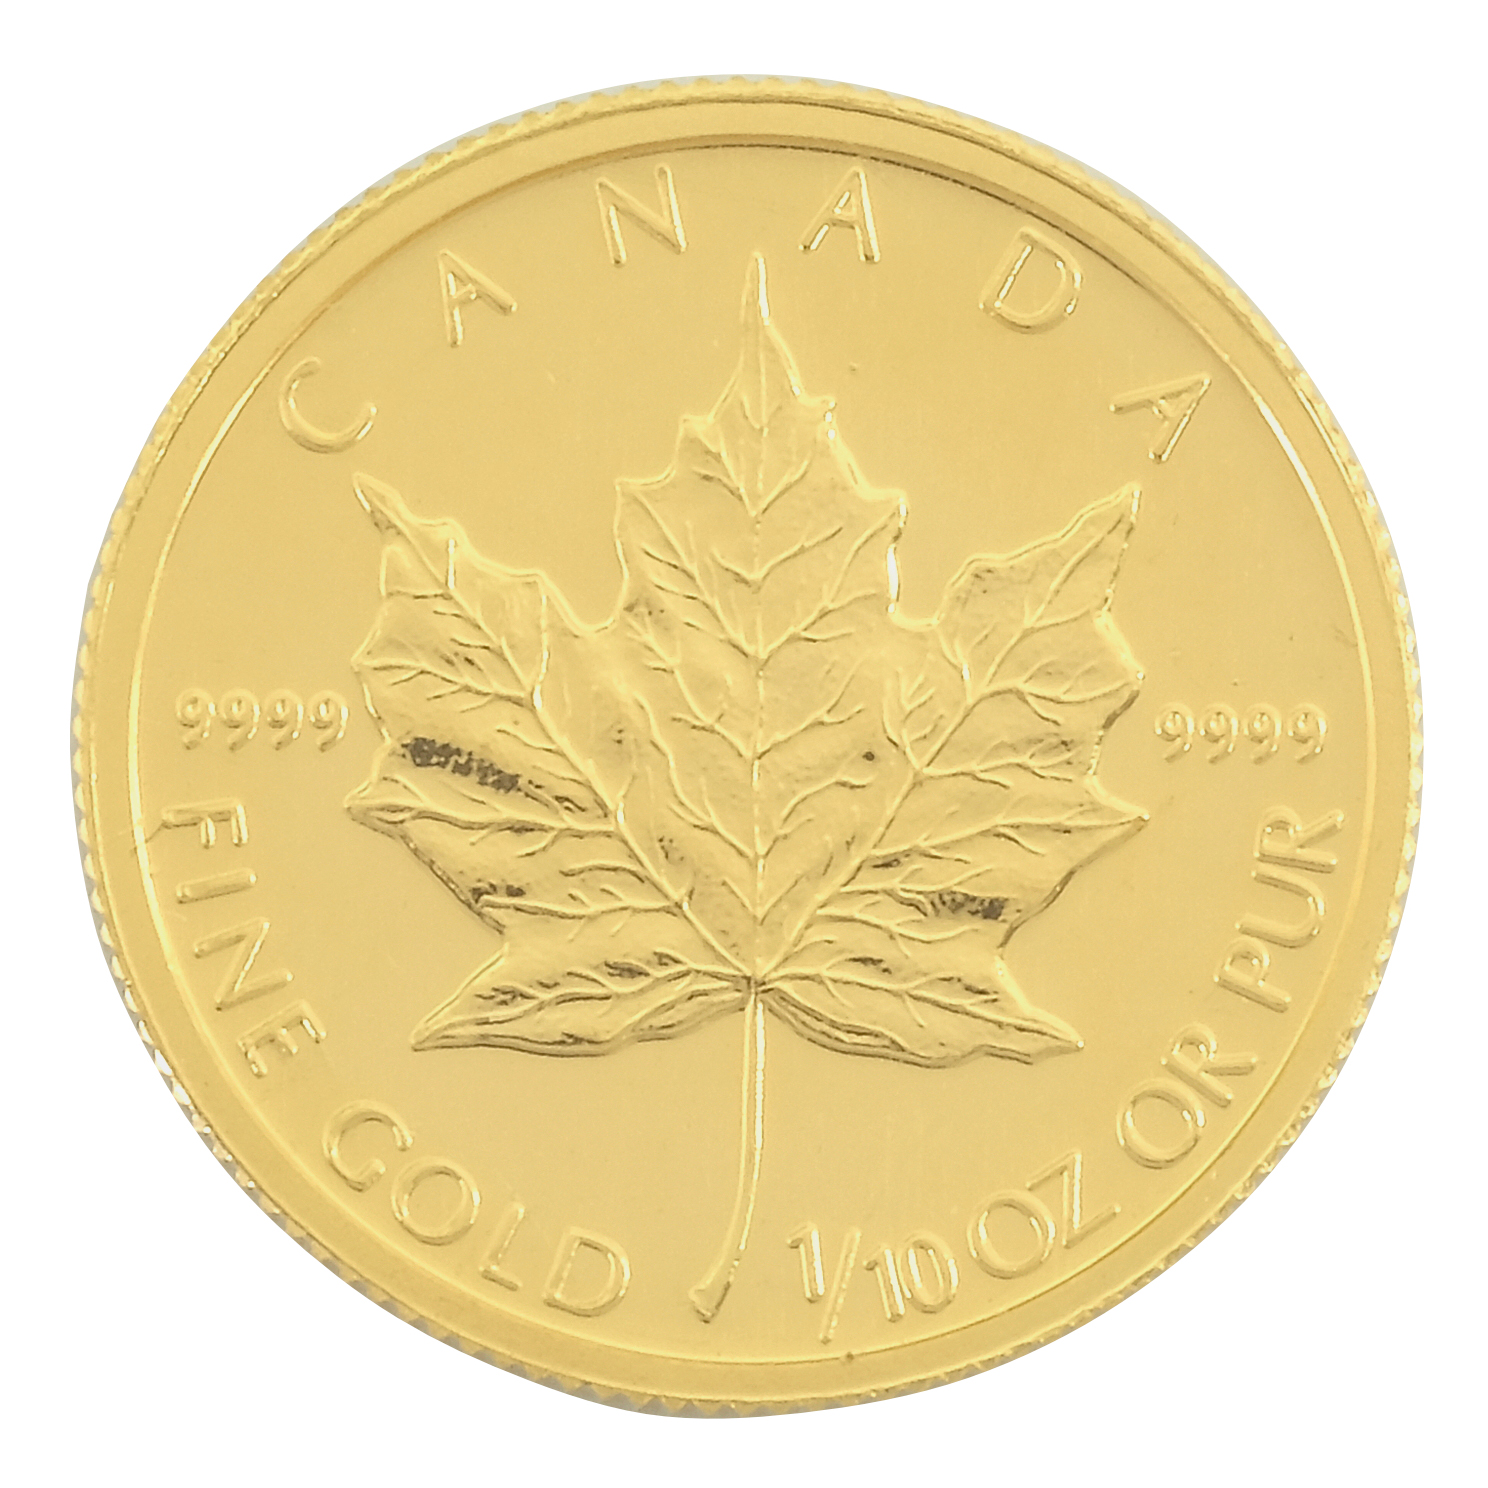 1/10 Oz Gold Canadian Maple Coin (Best Value)